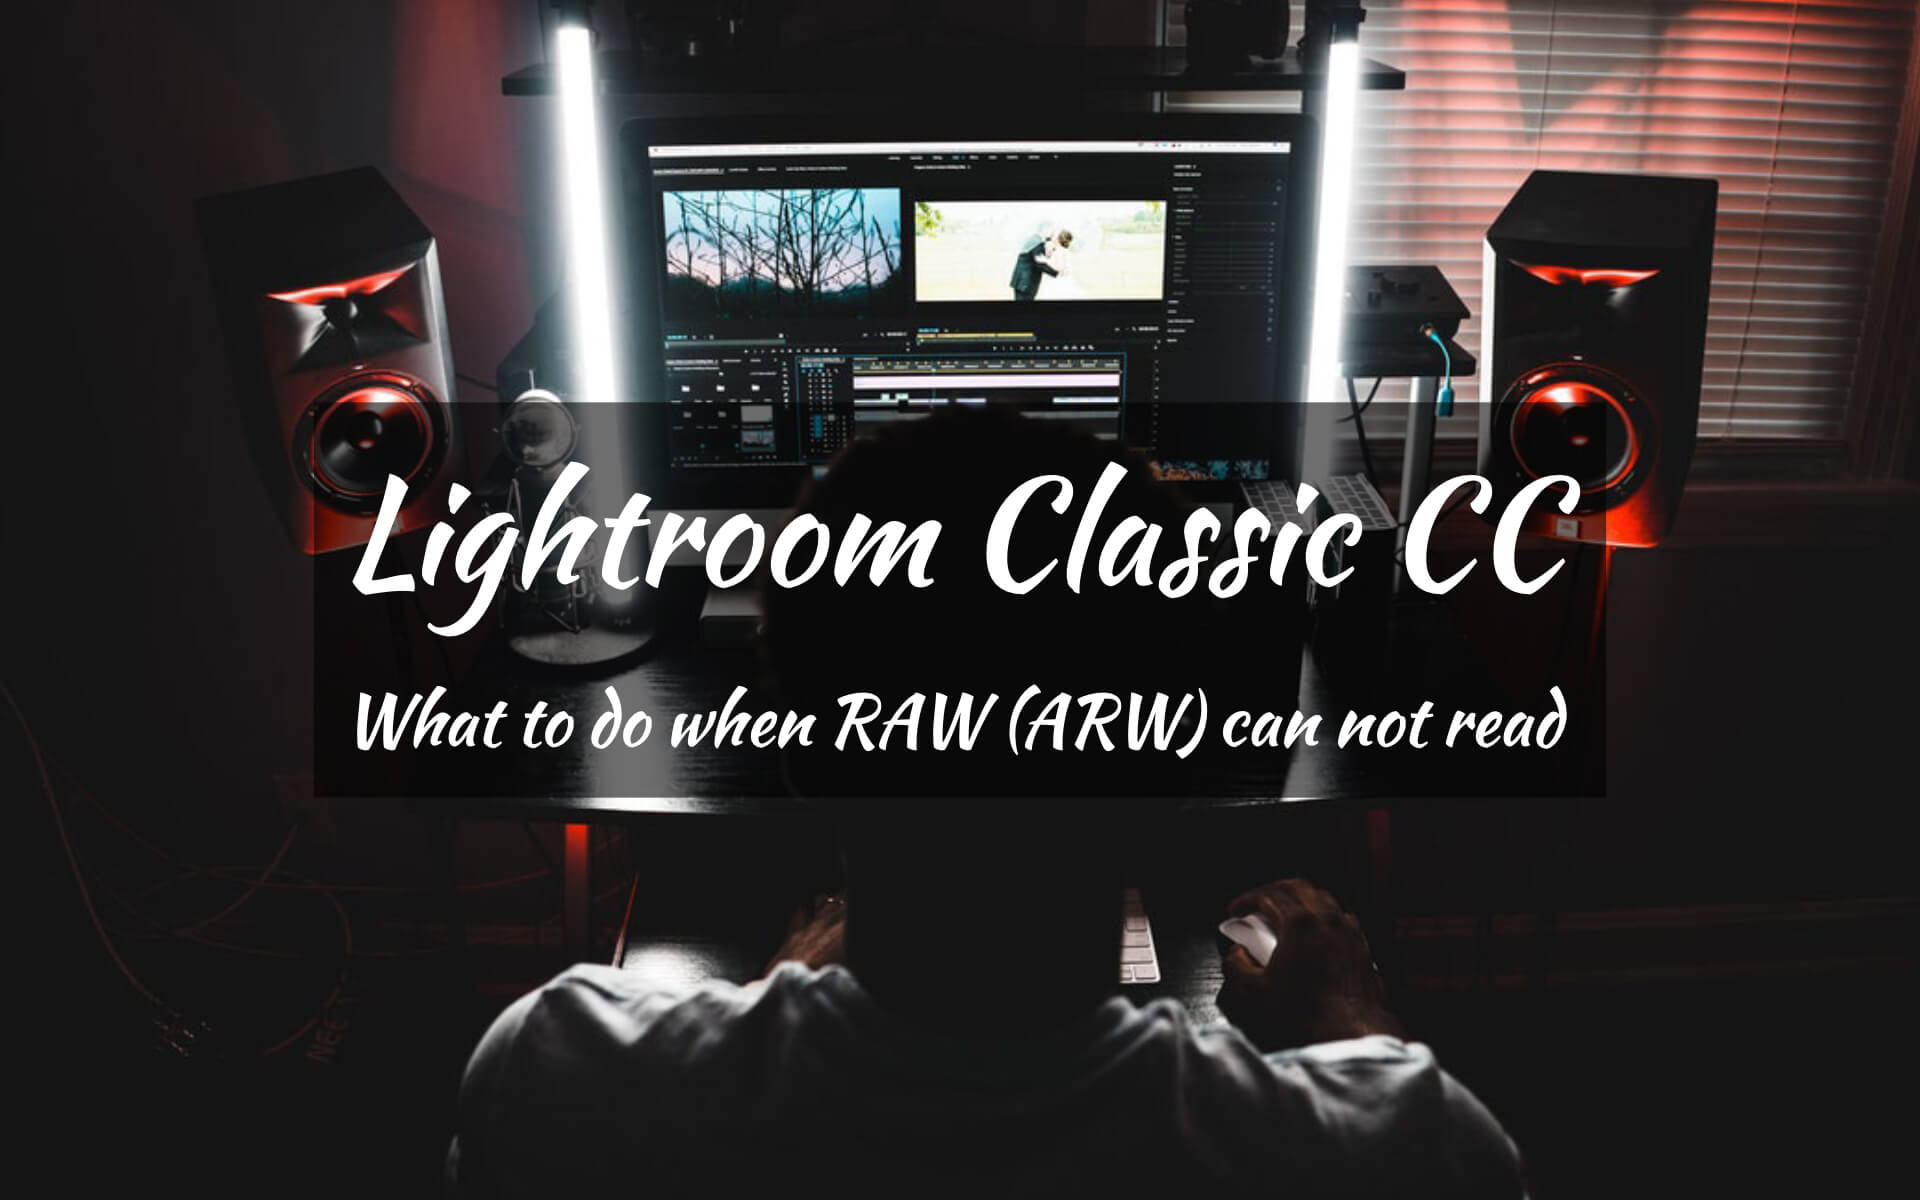 Lightroom Classic CC What to do when RAW (ARW) can not read